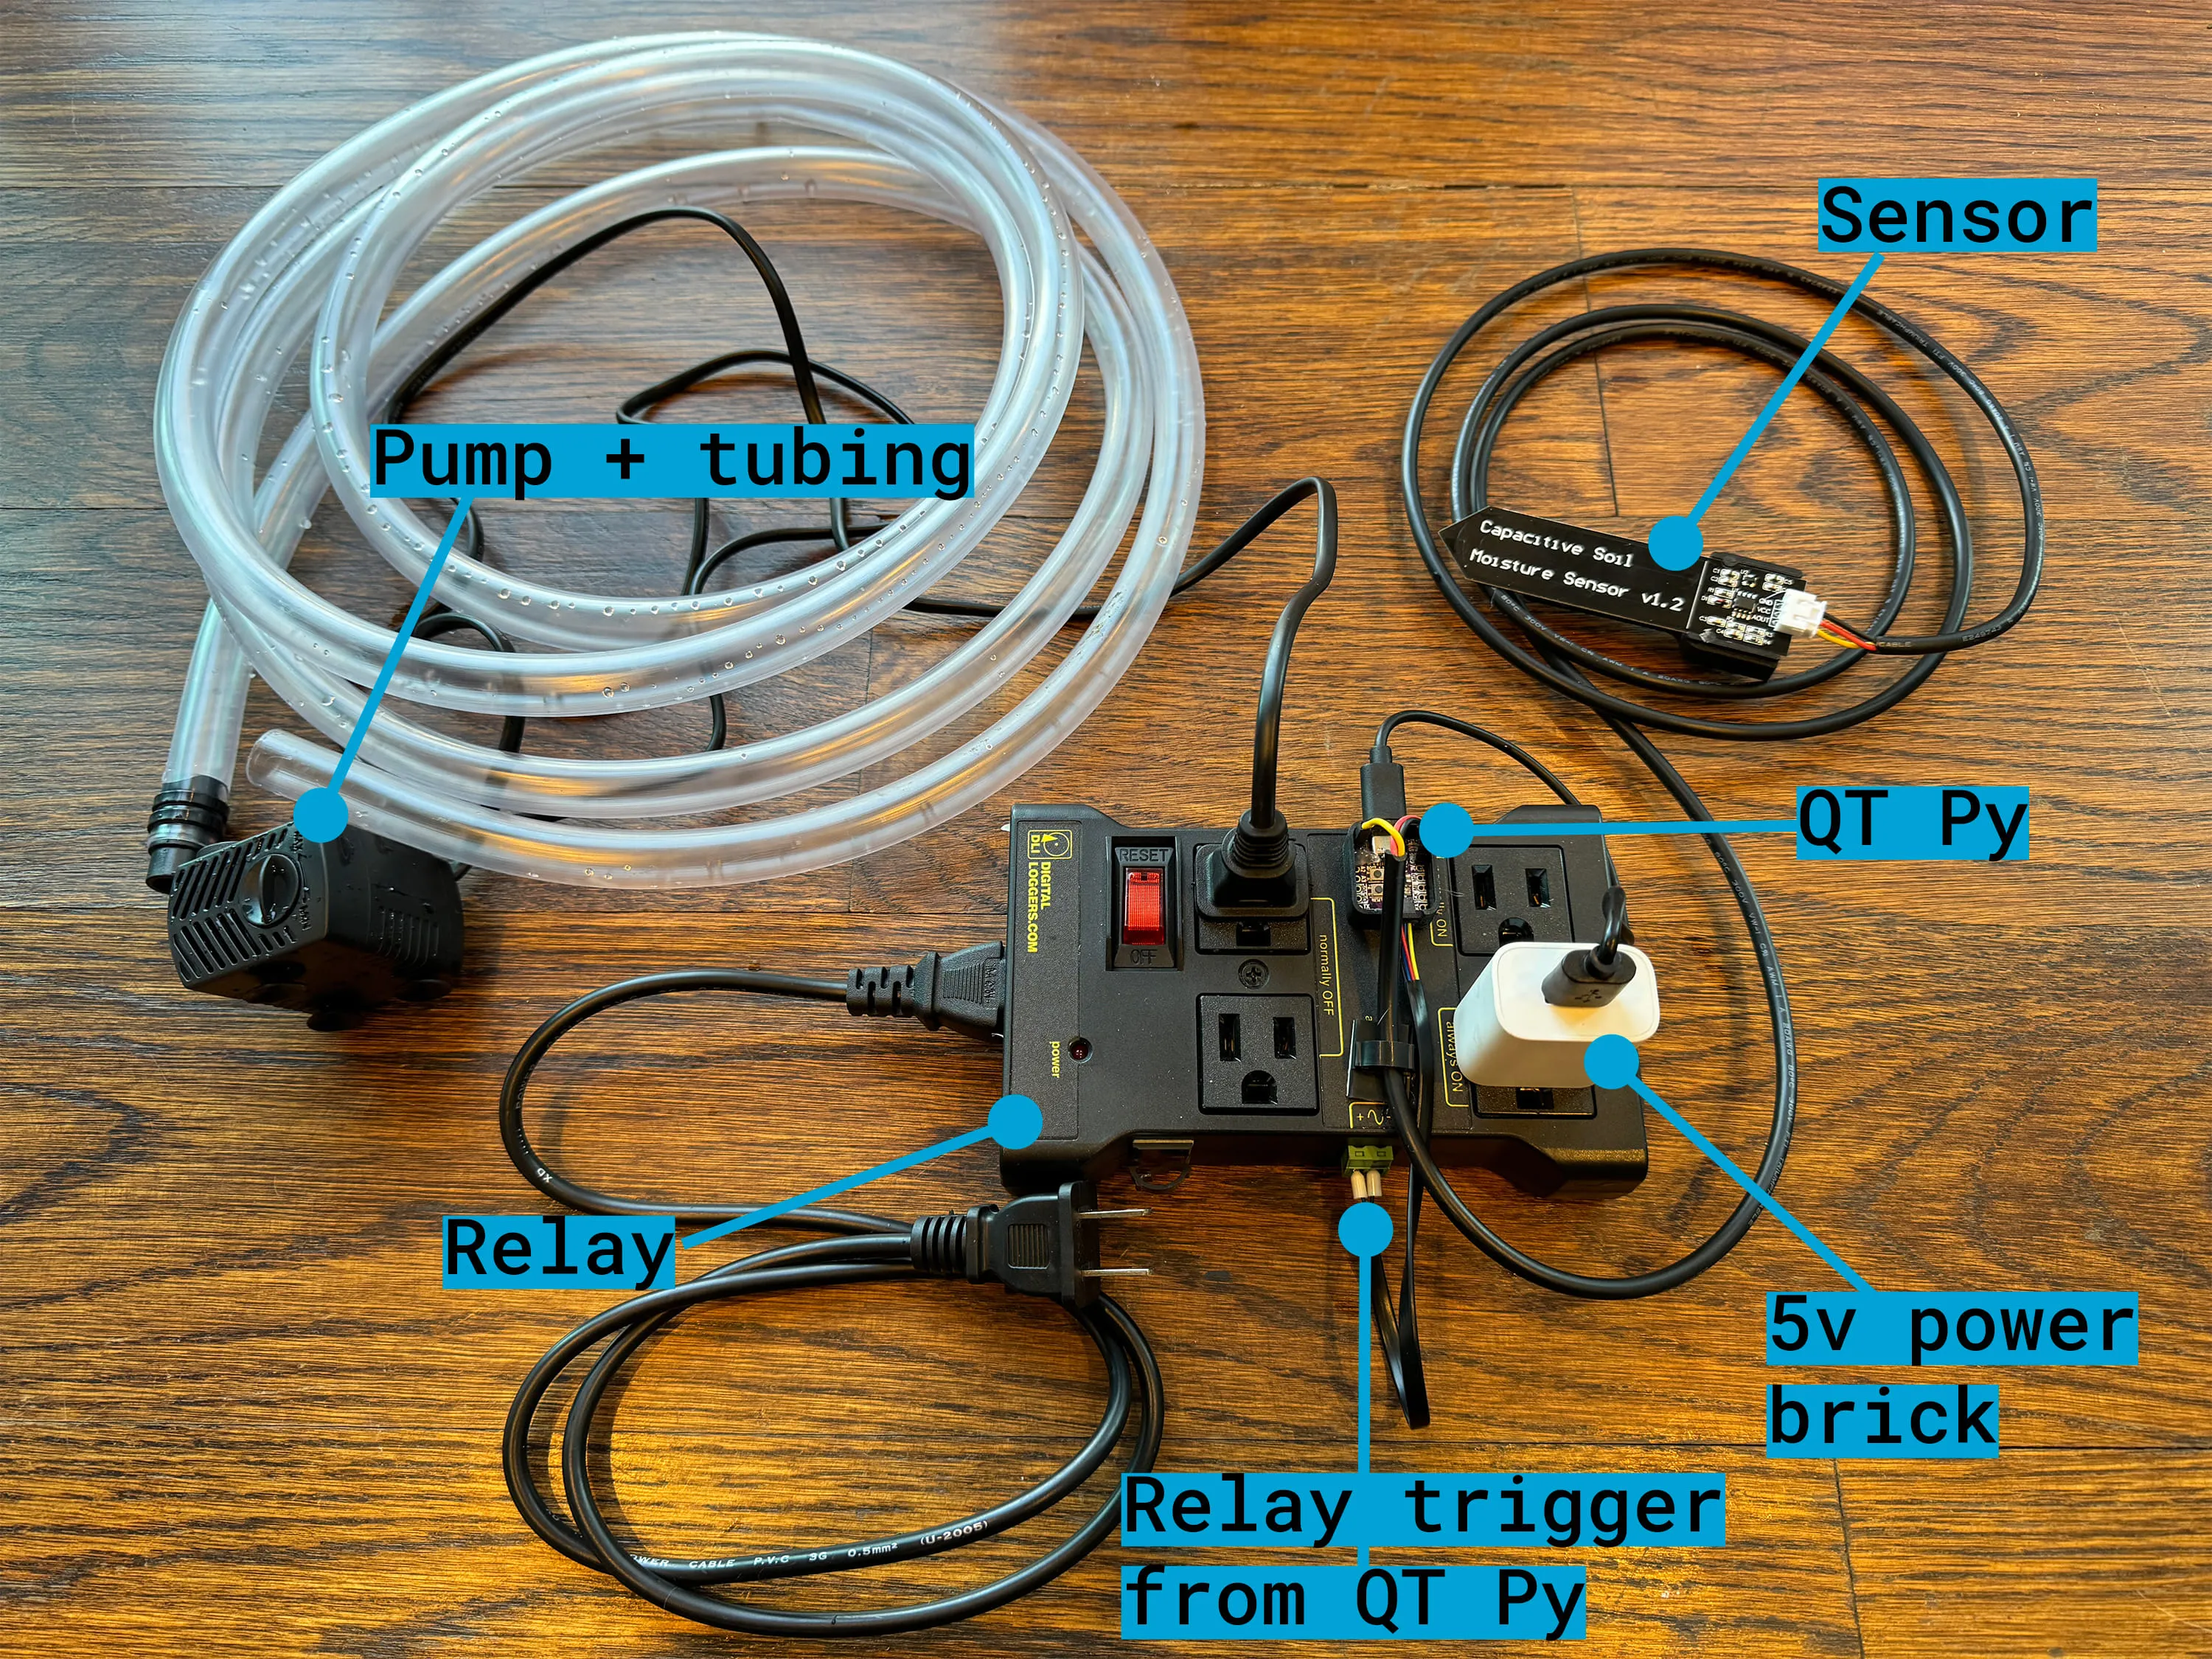 Overhead view of the power relay, QT Py, moisture sensor, pump, and tubing connected together